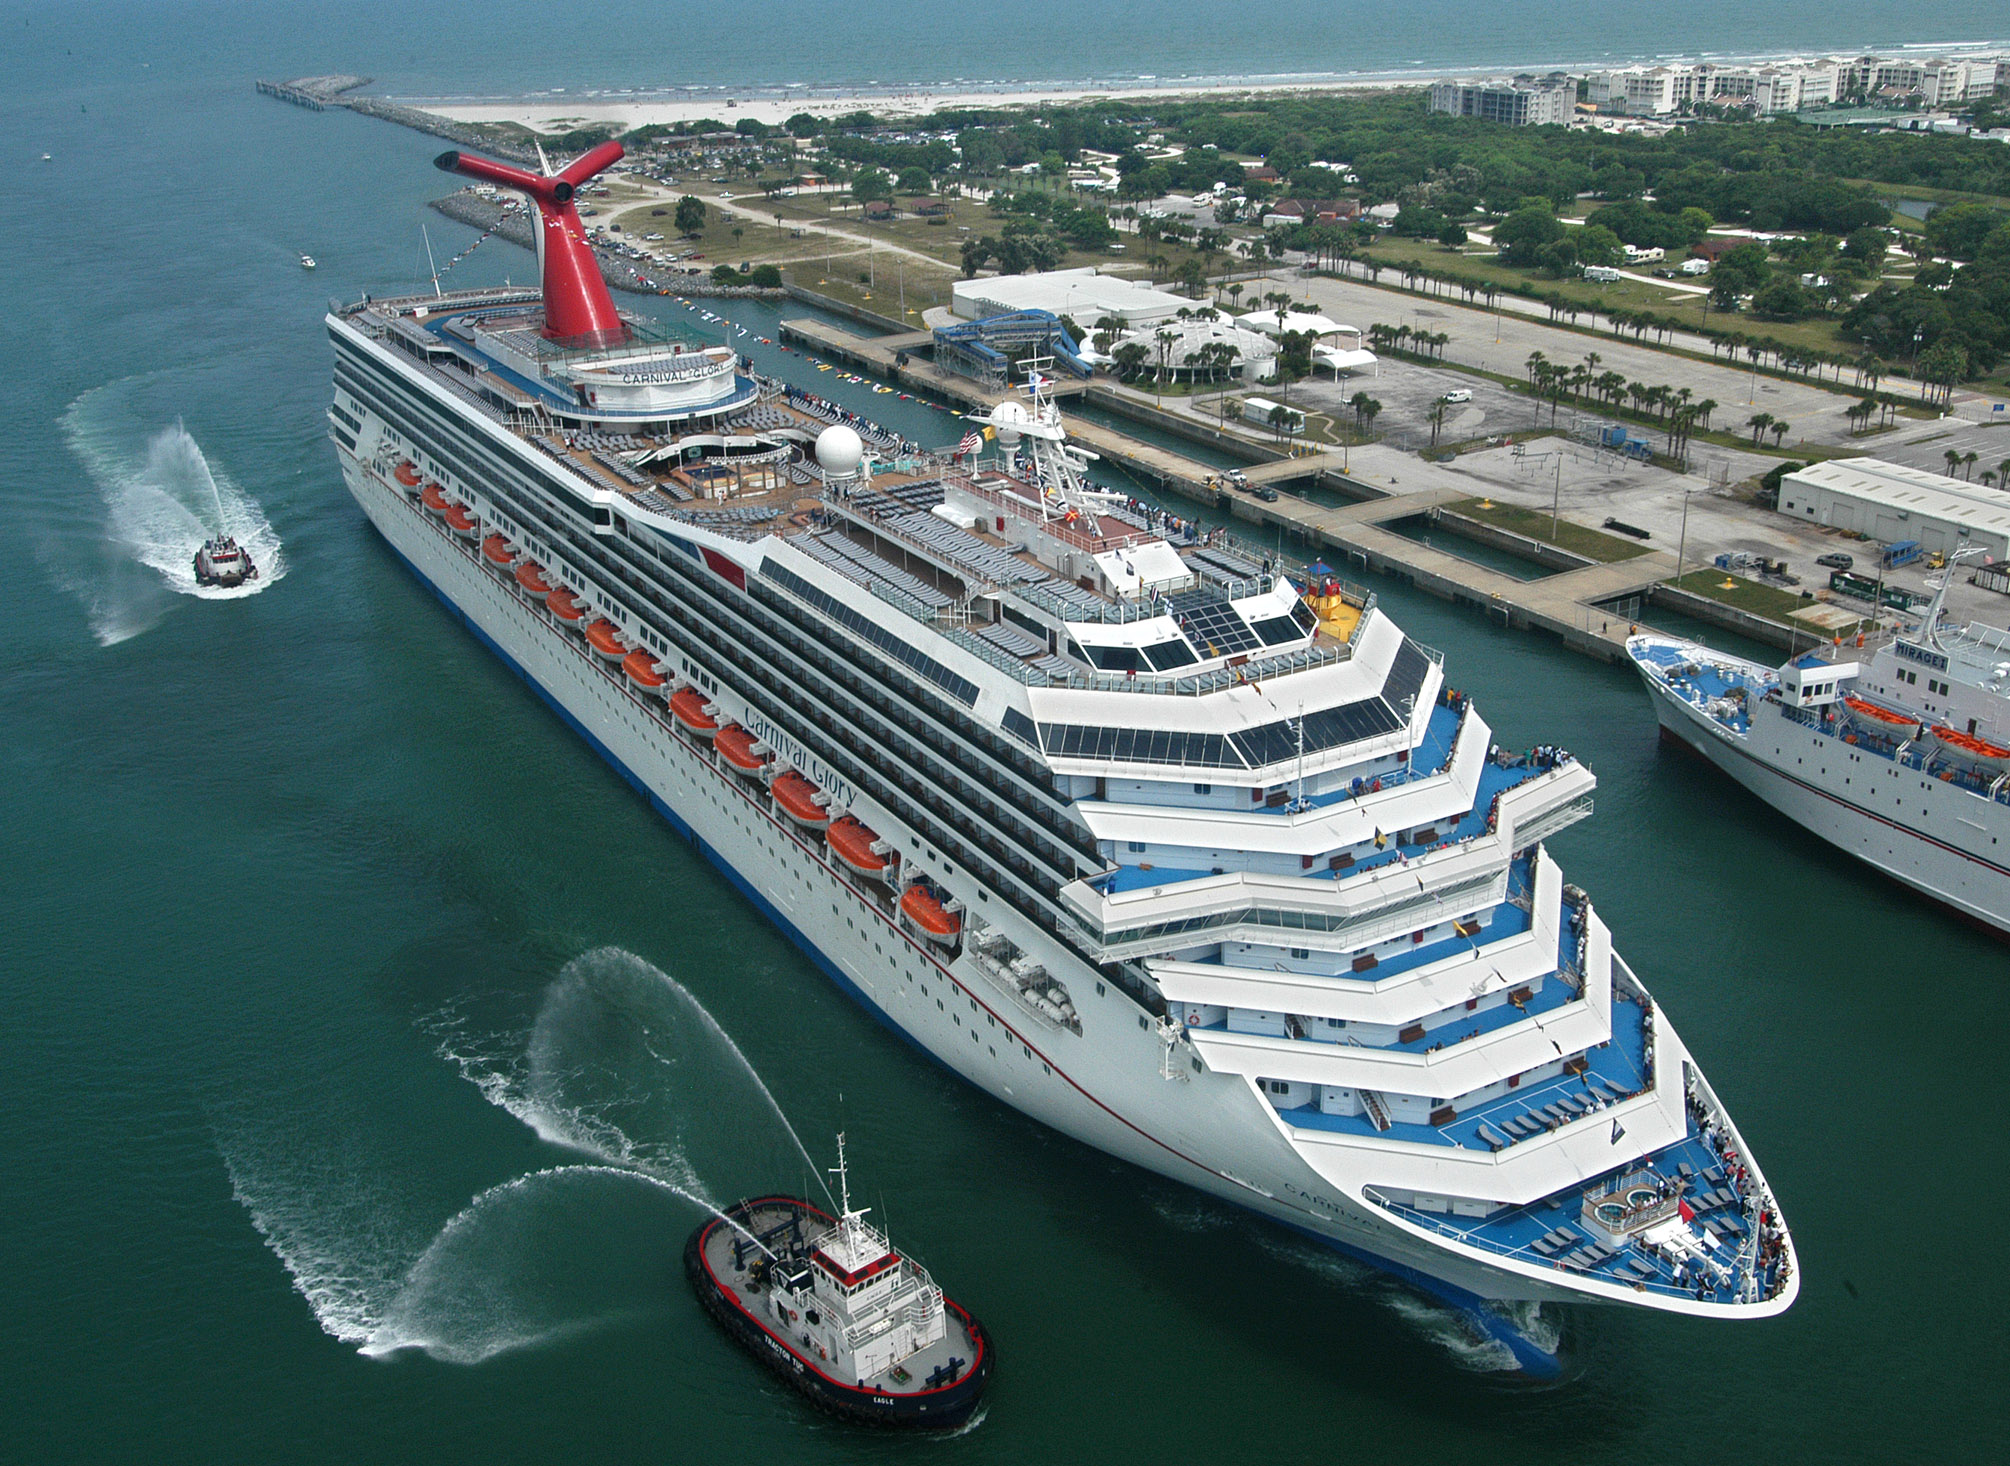 carnival-cruise-ships-generate-10-times-more-pollution-than-all-of